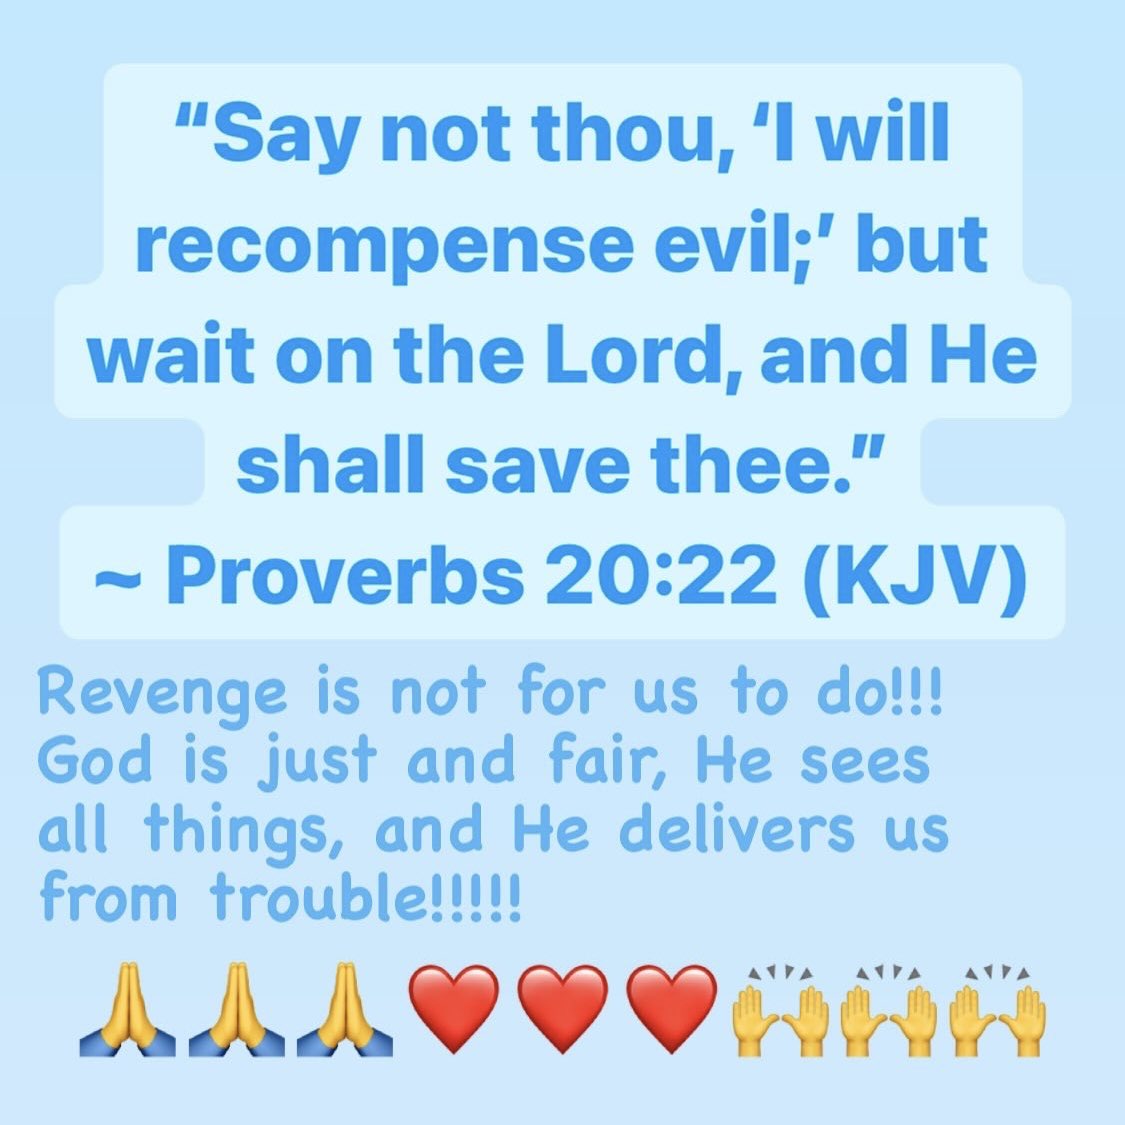 Revenge is not for us to do!!! God is just and fair, He sees all things, and He delivers us from trouble!!!!! 
🙏🙏🙏❤️❤️❤️🙌🙌🙌
#PraiseGod #PraiseTheLord #GodIsGood #Christian #LoveGod #LoveJesus #LoveEveryone #Love #FaithInGod #ChristianFaith #Faith #HopeInGod #Hope +